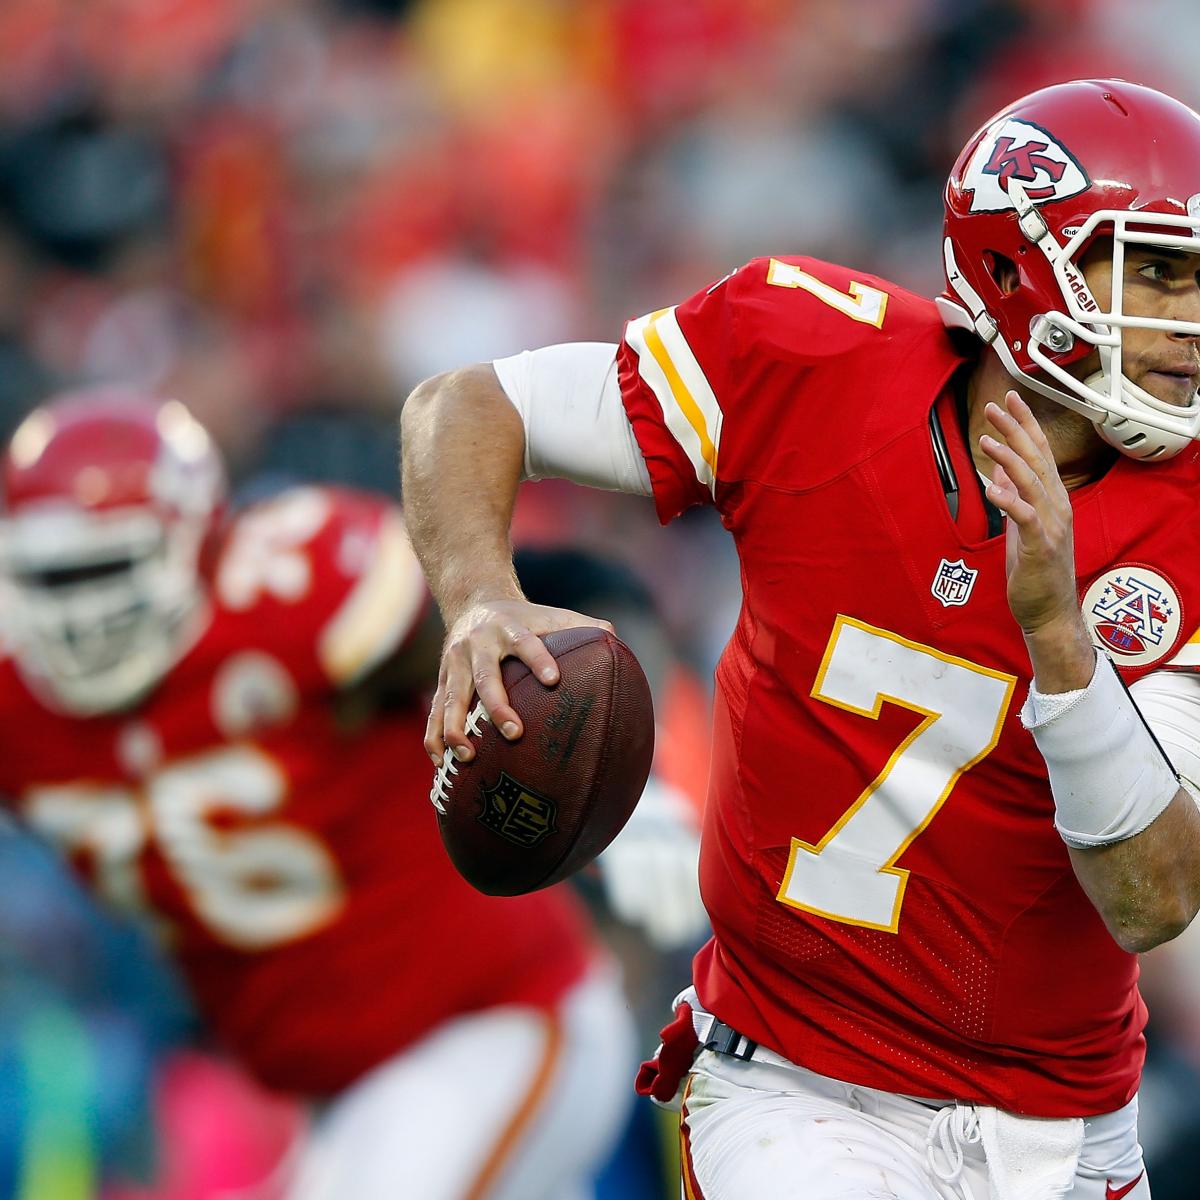 Who Has the NFL's Worst Offense Jaguars or Chiefs? News, Scores